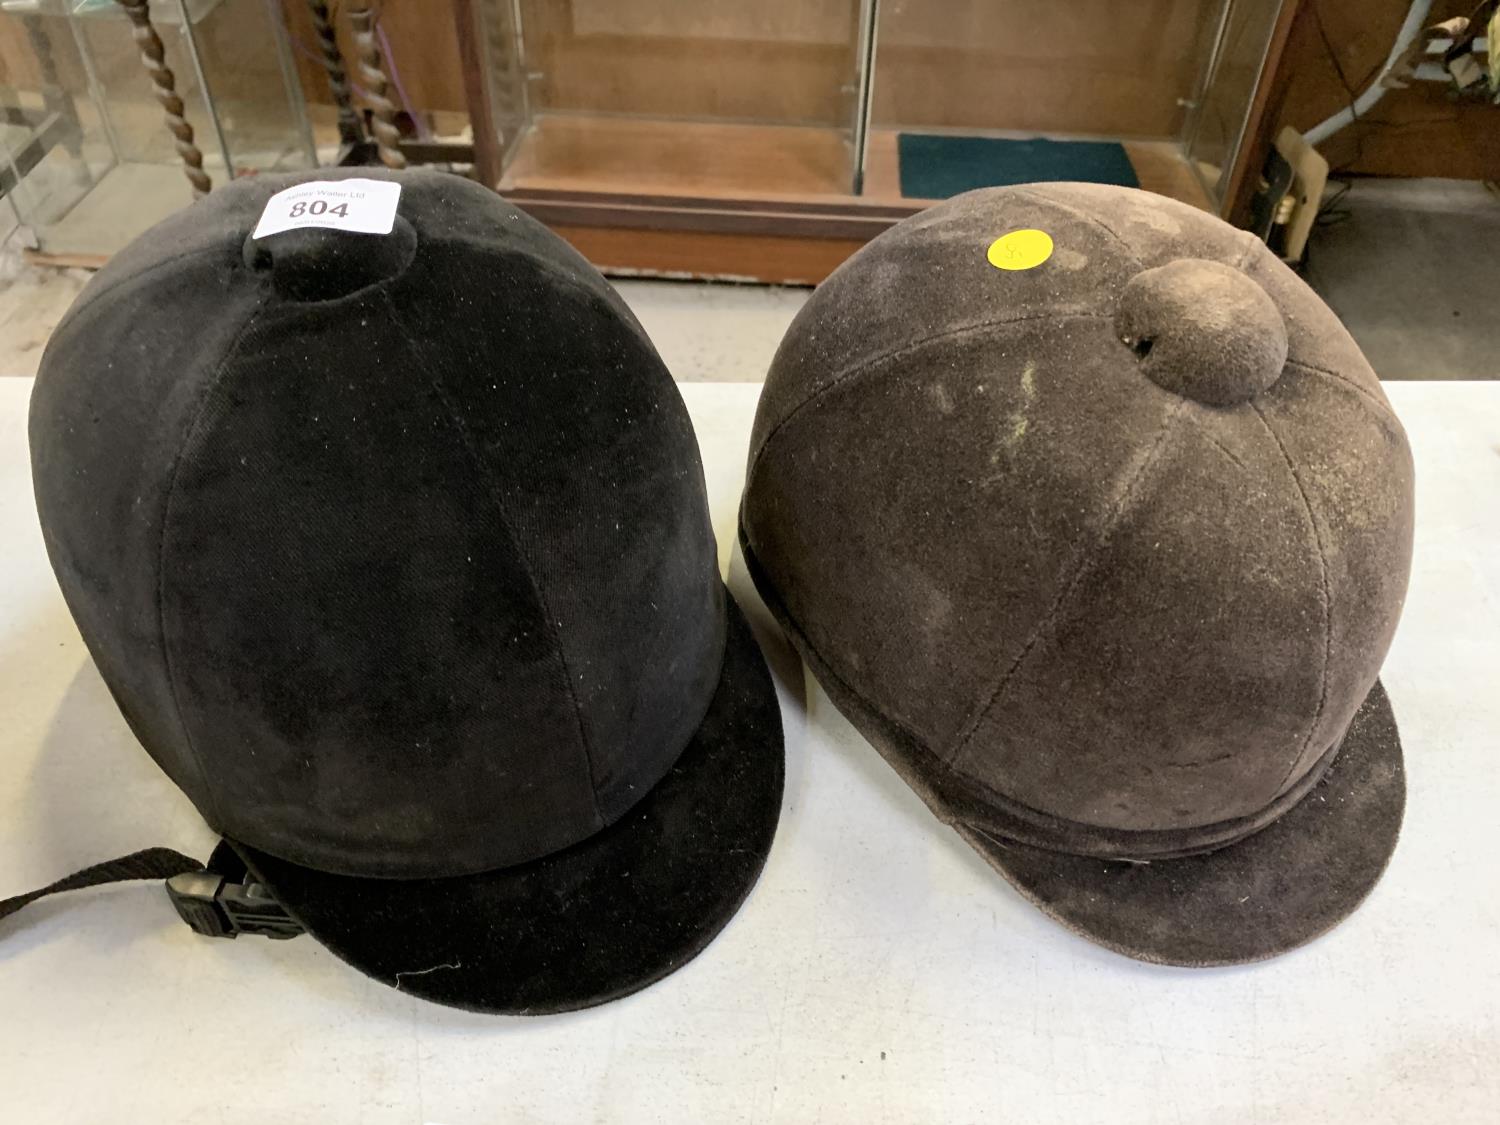 TWO HARD RIDING HATS